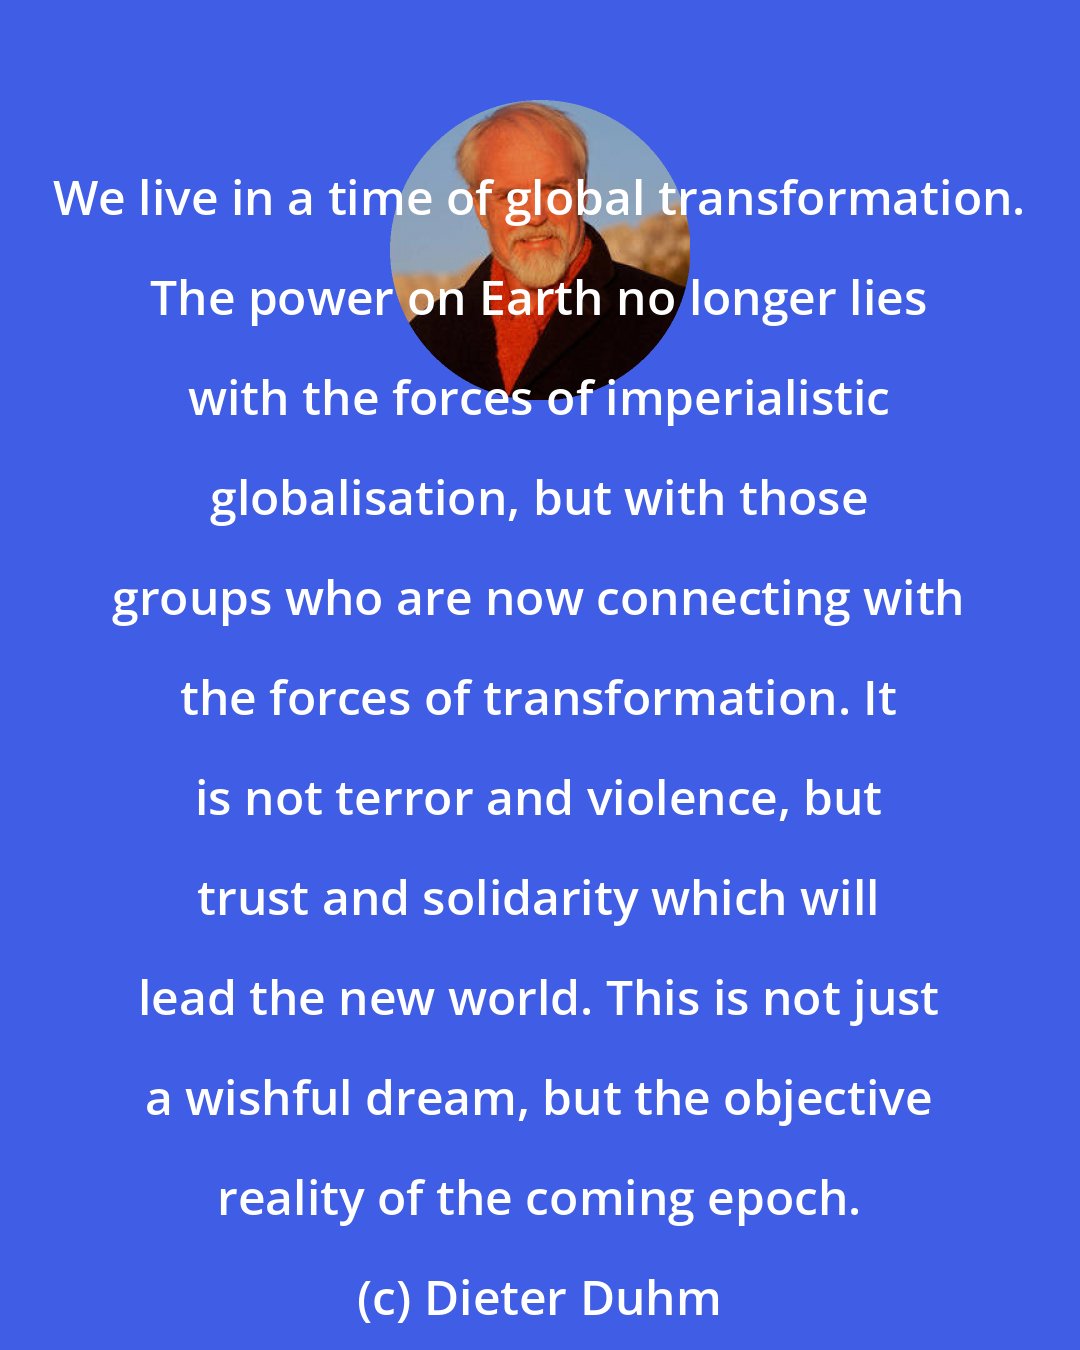 Dieter Duhm: We live in a time of global transformation. The power on Earth no longer lies with the forces of imperialistic globalisation, but with those groups who are now connecting with the forces of transformation. It is not terror and violence, but trust and solidarity which will lead the new world. This is not just a wishful dream, but the objective reality of the coming epoch.